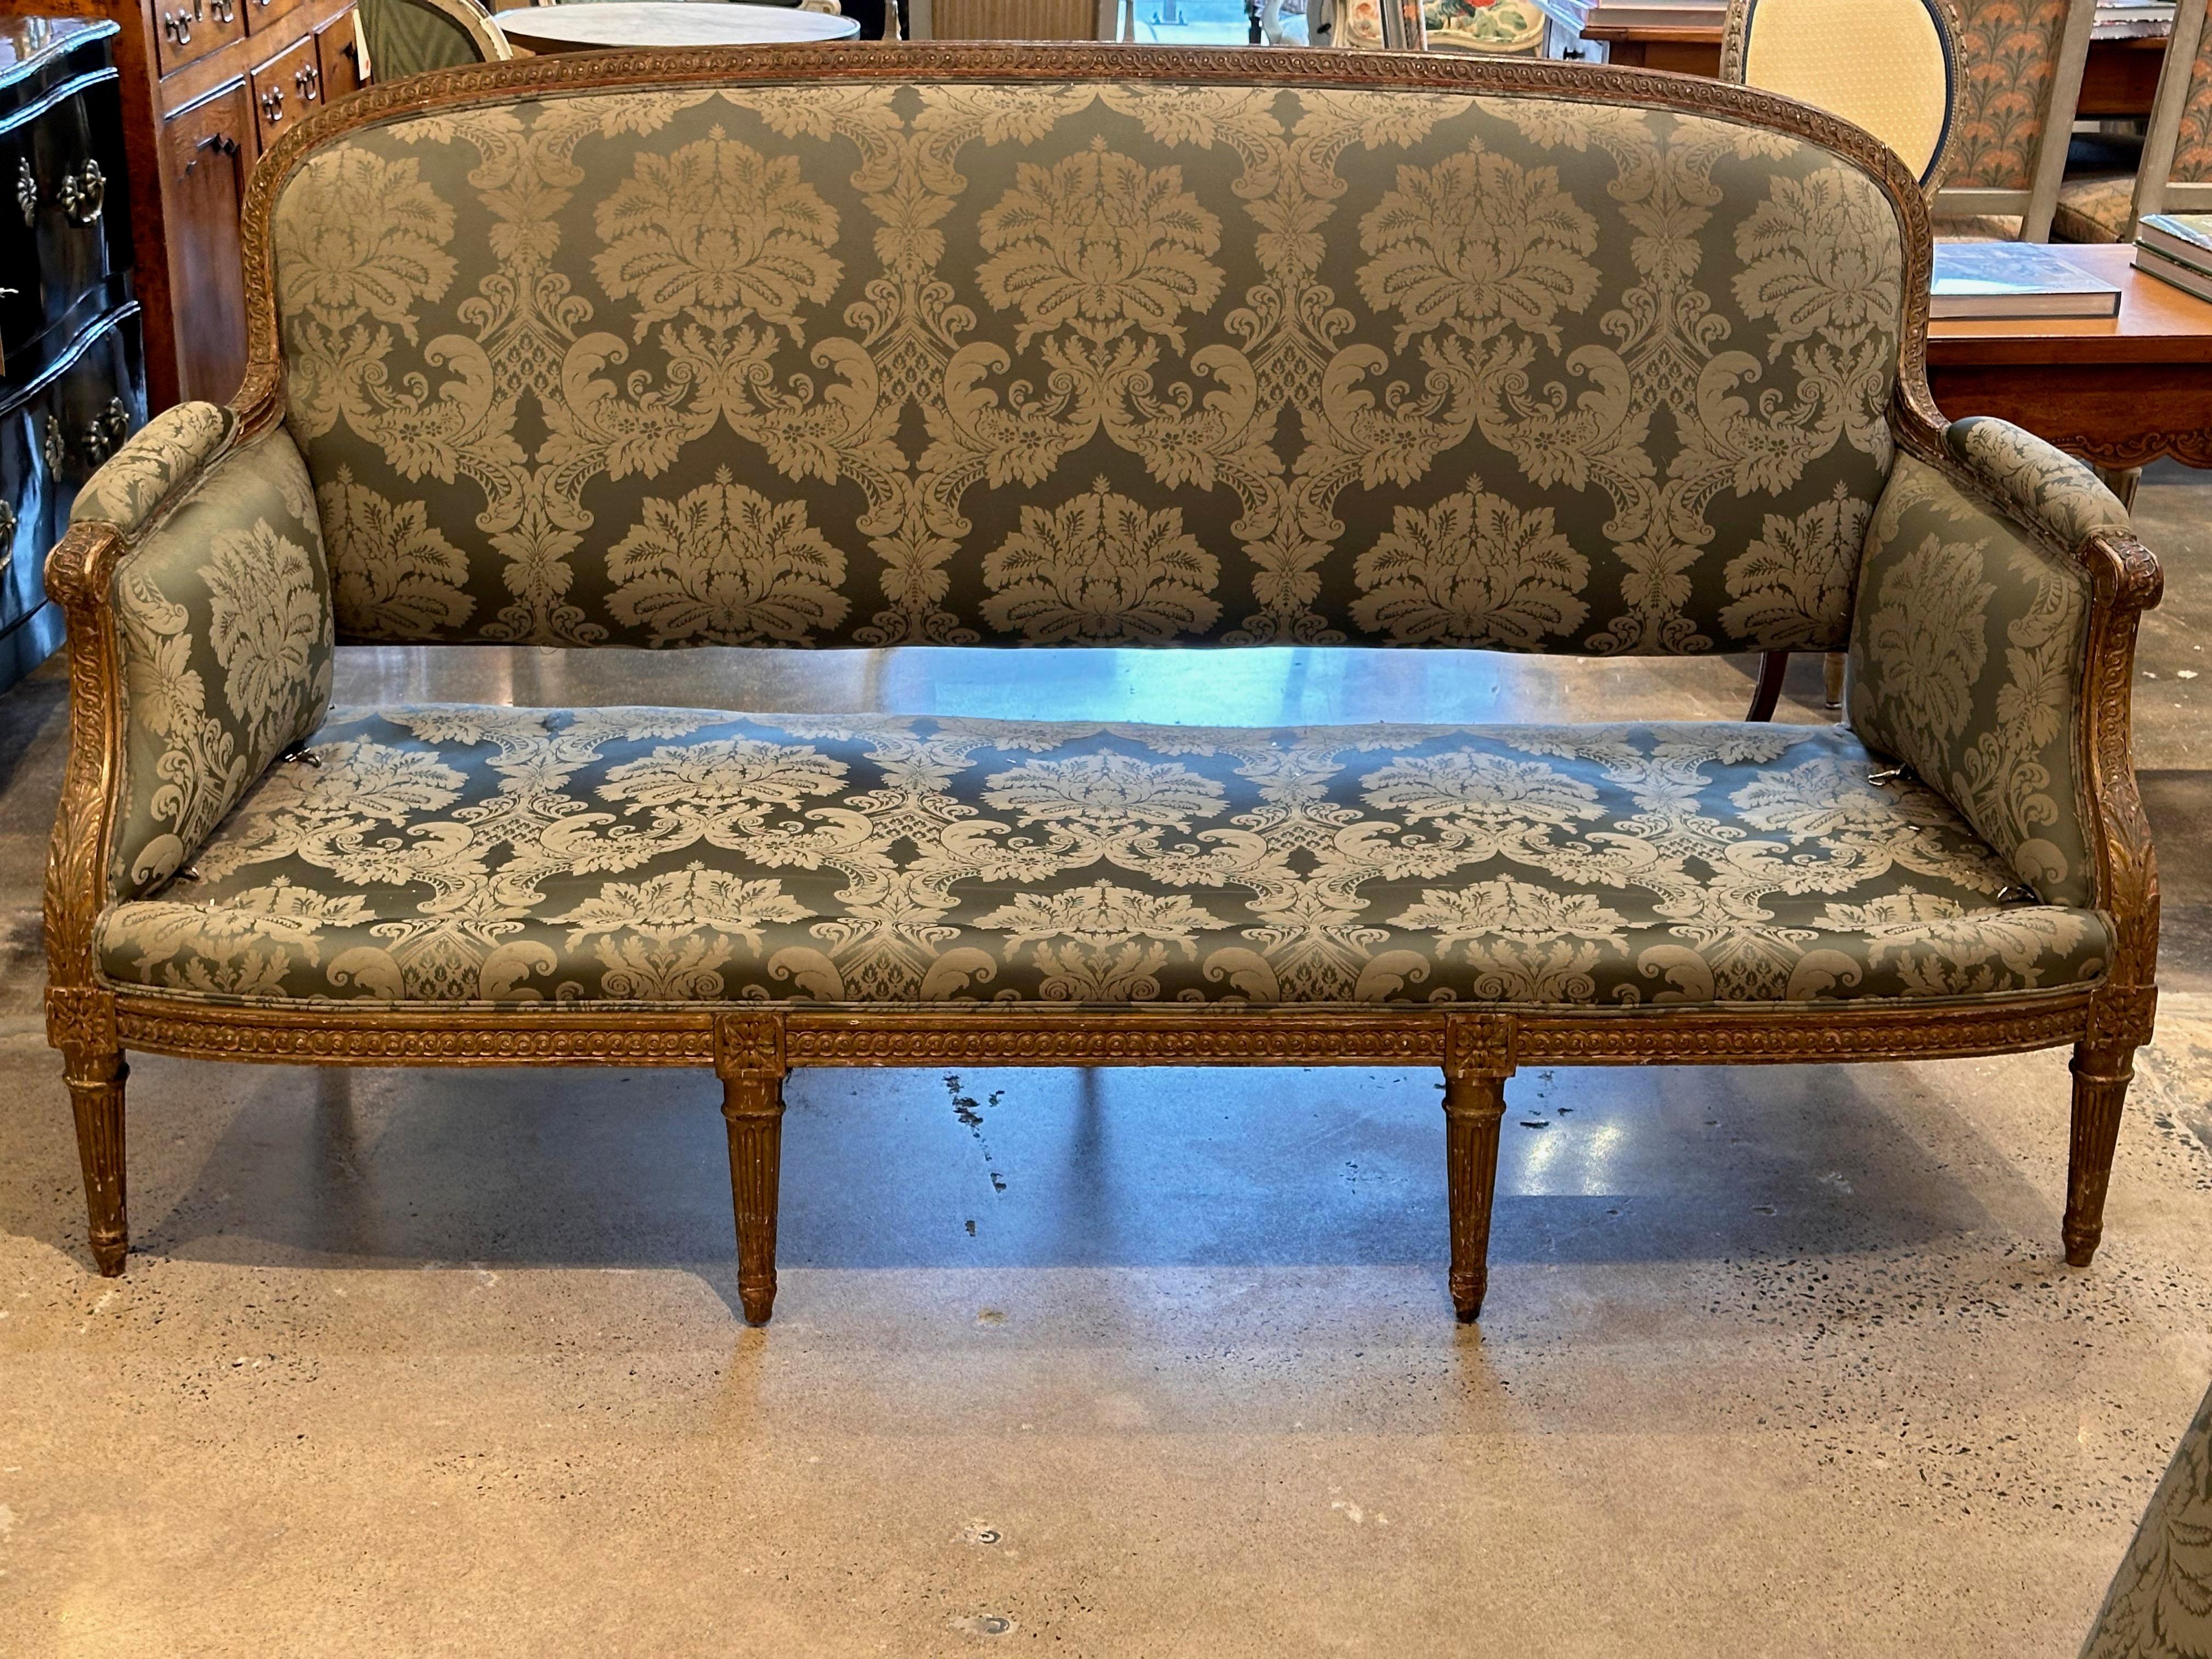 This beautiful French settee is ready for your home. Beautiful and comfortable.